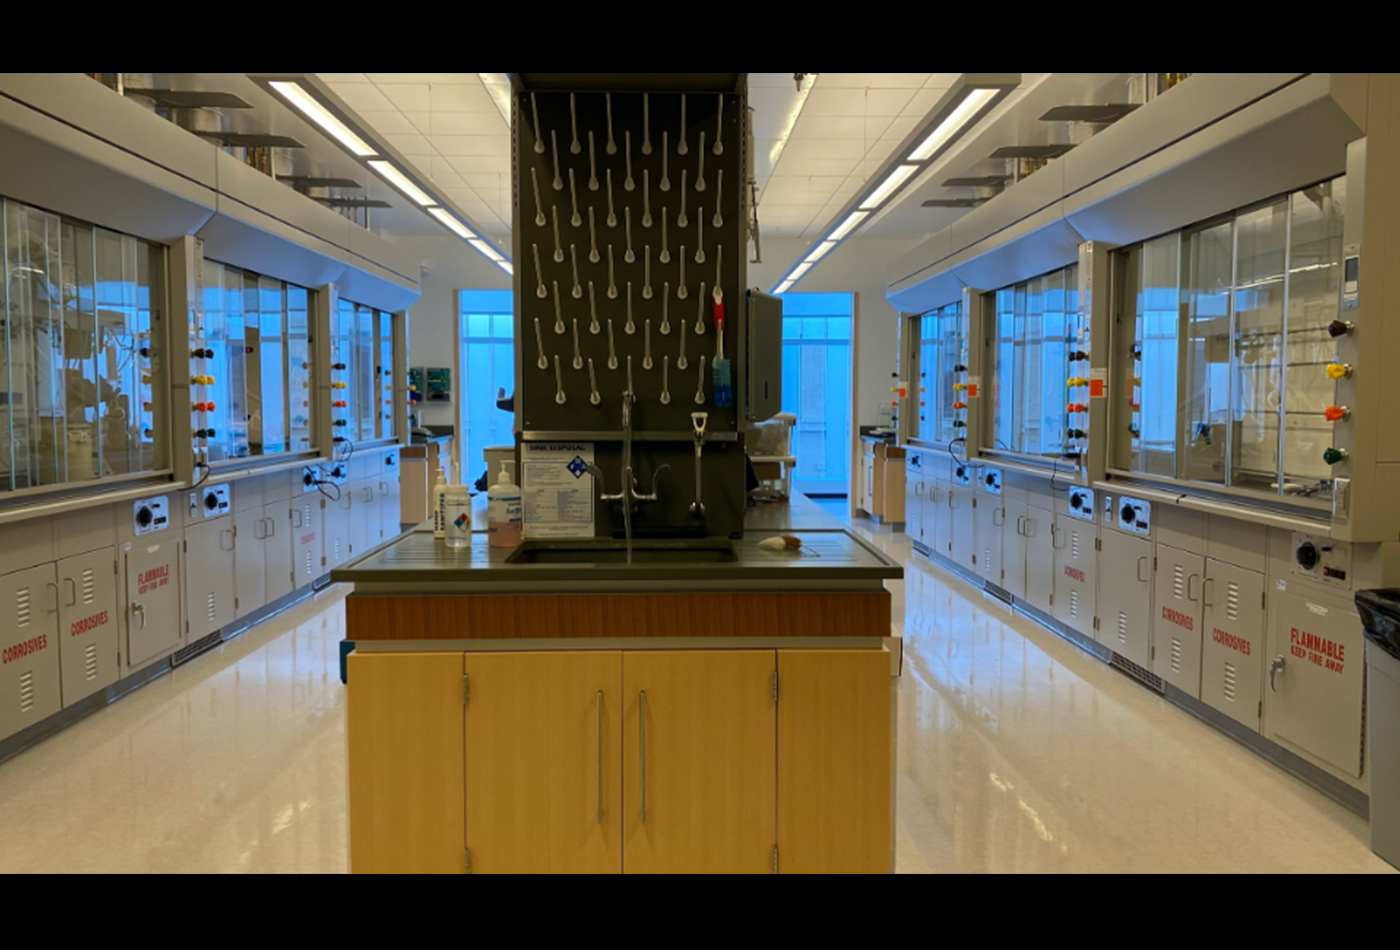 An image of an immaculate lab bay.